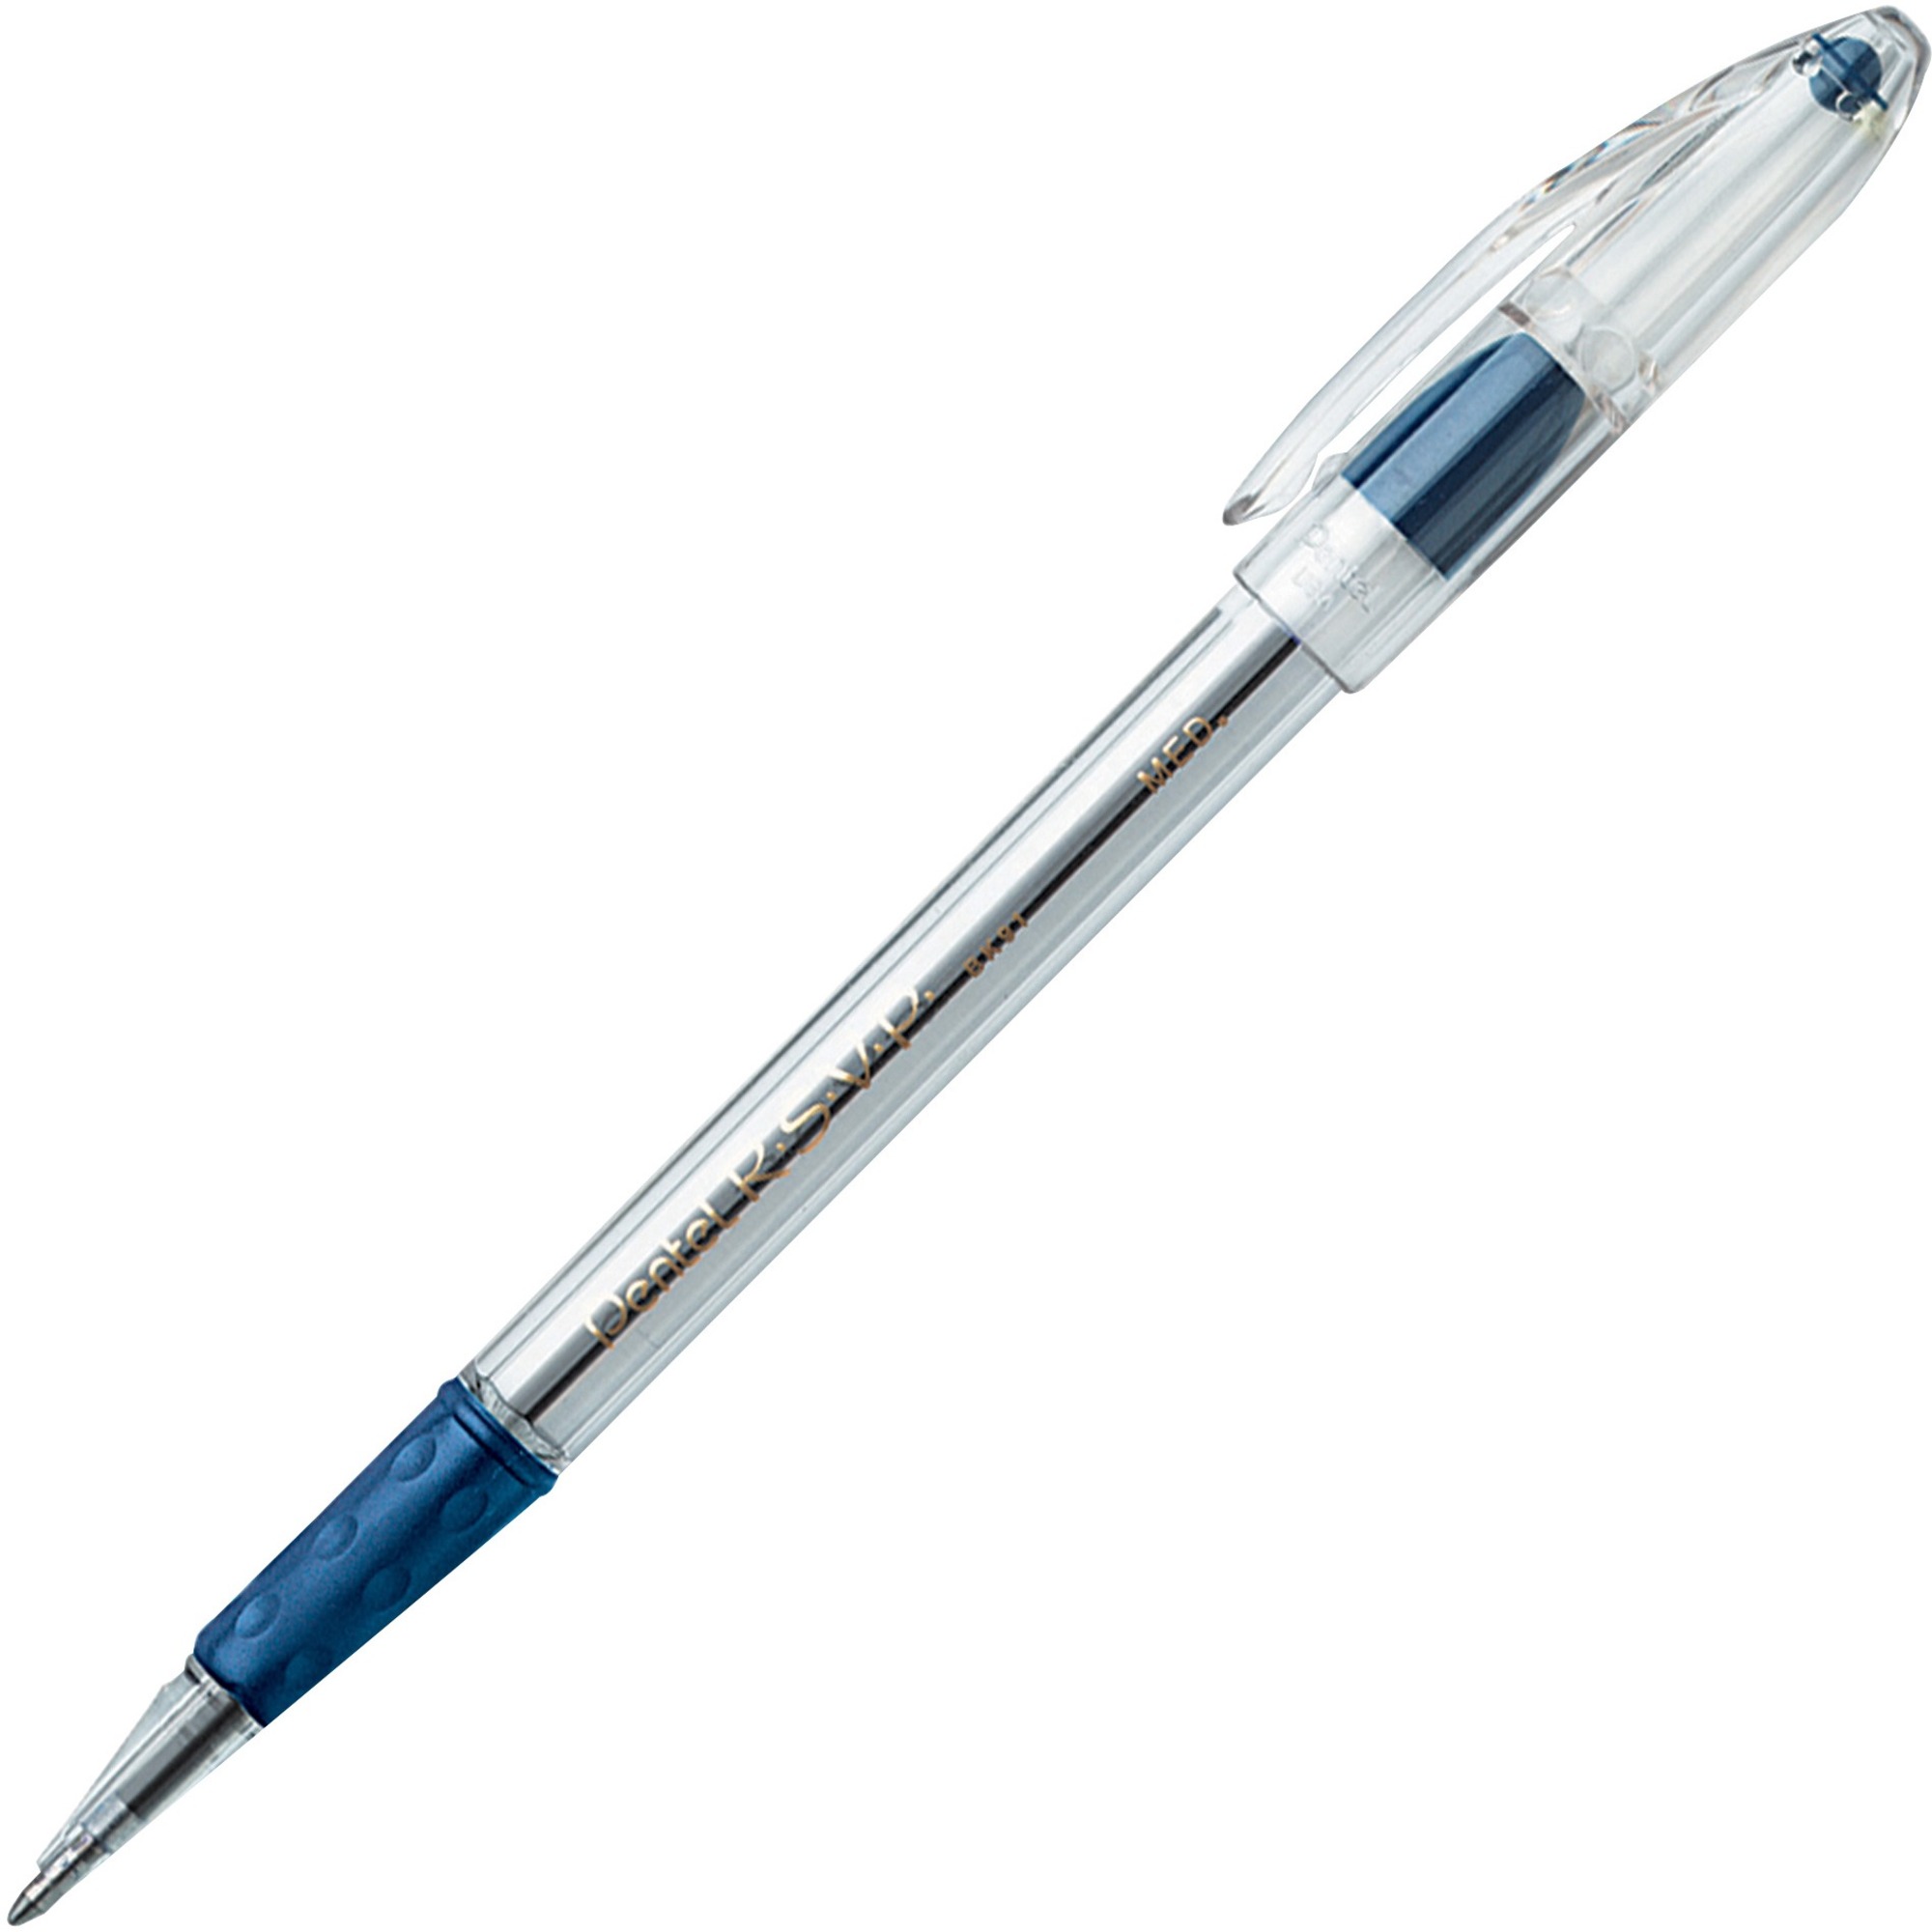 BIC Round Stic Grip Extra Comfort Blue Ballpoint Pens, Medium Point  (1.2mm), 12-Count Pack, Excellent Writing Pens With Soft Grip for Superb  Comfort and Control